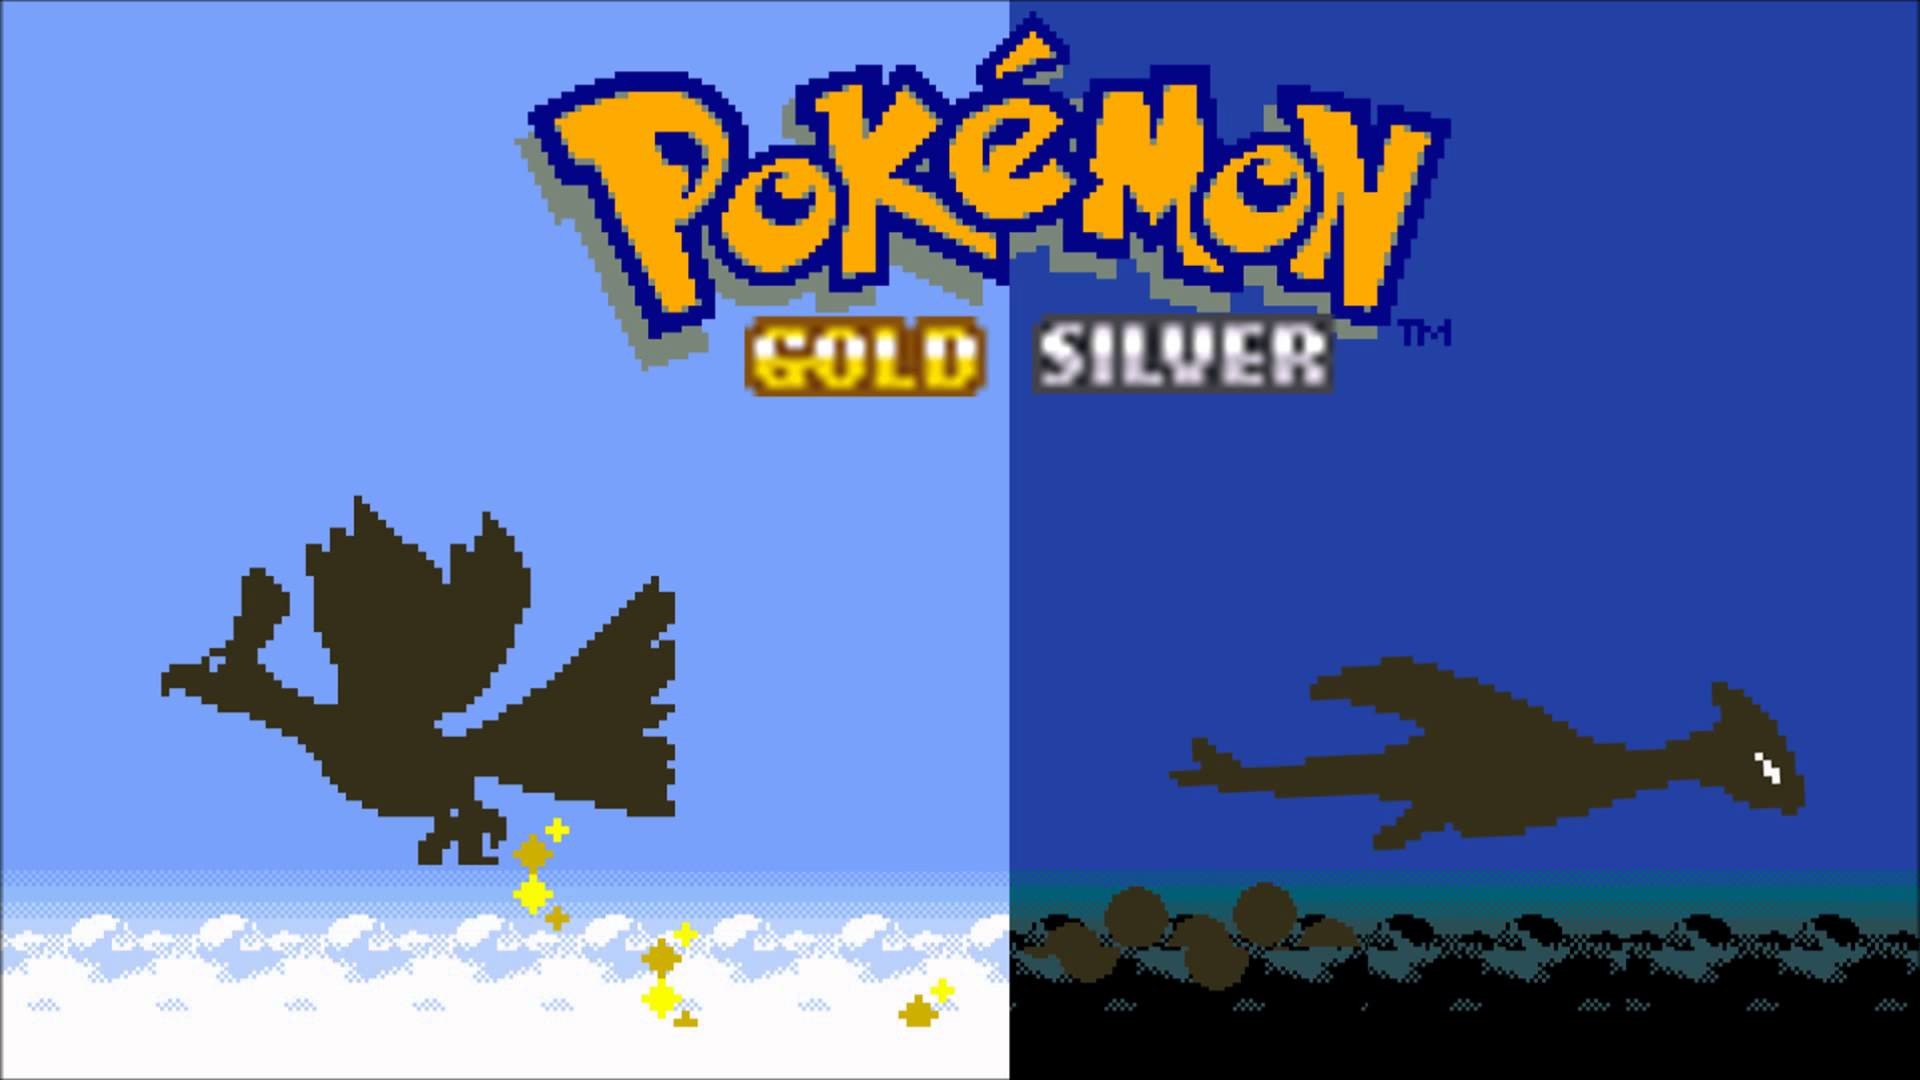 1920x1080 'Gold' & 'Silver' 3DS Download Codes Being Sold In Retro-Inspired Boxes